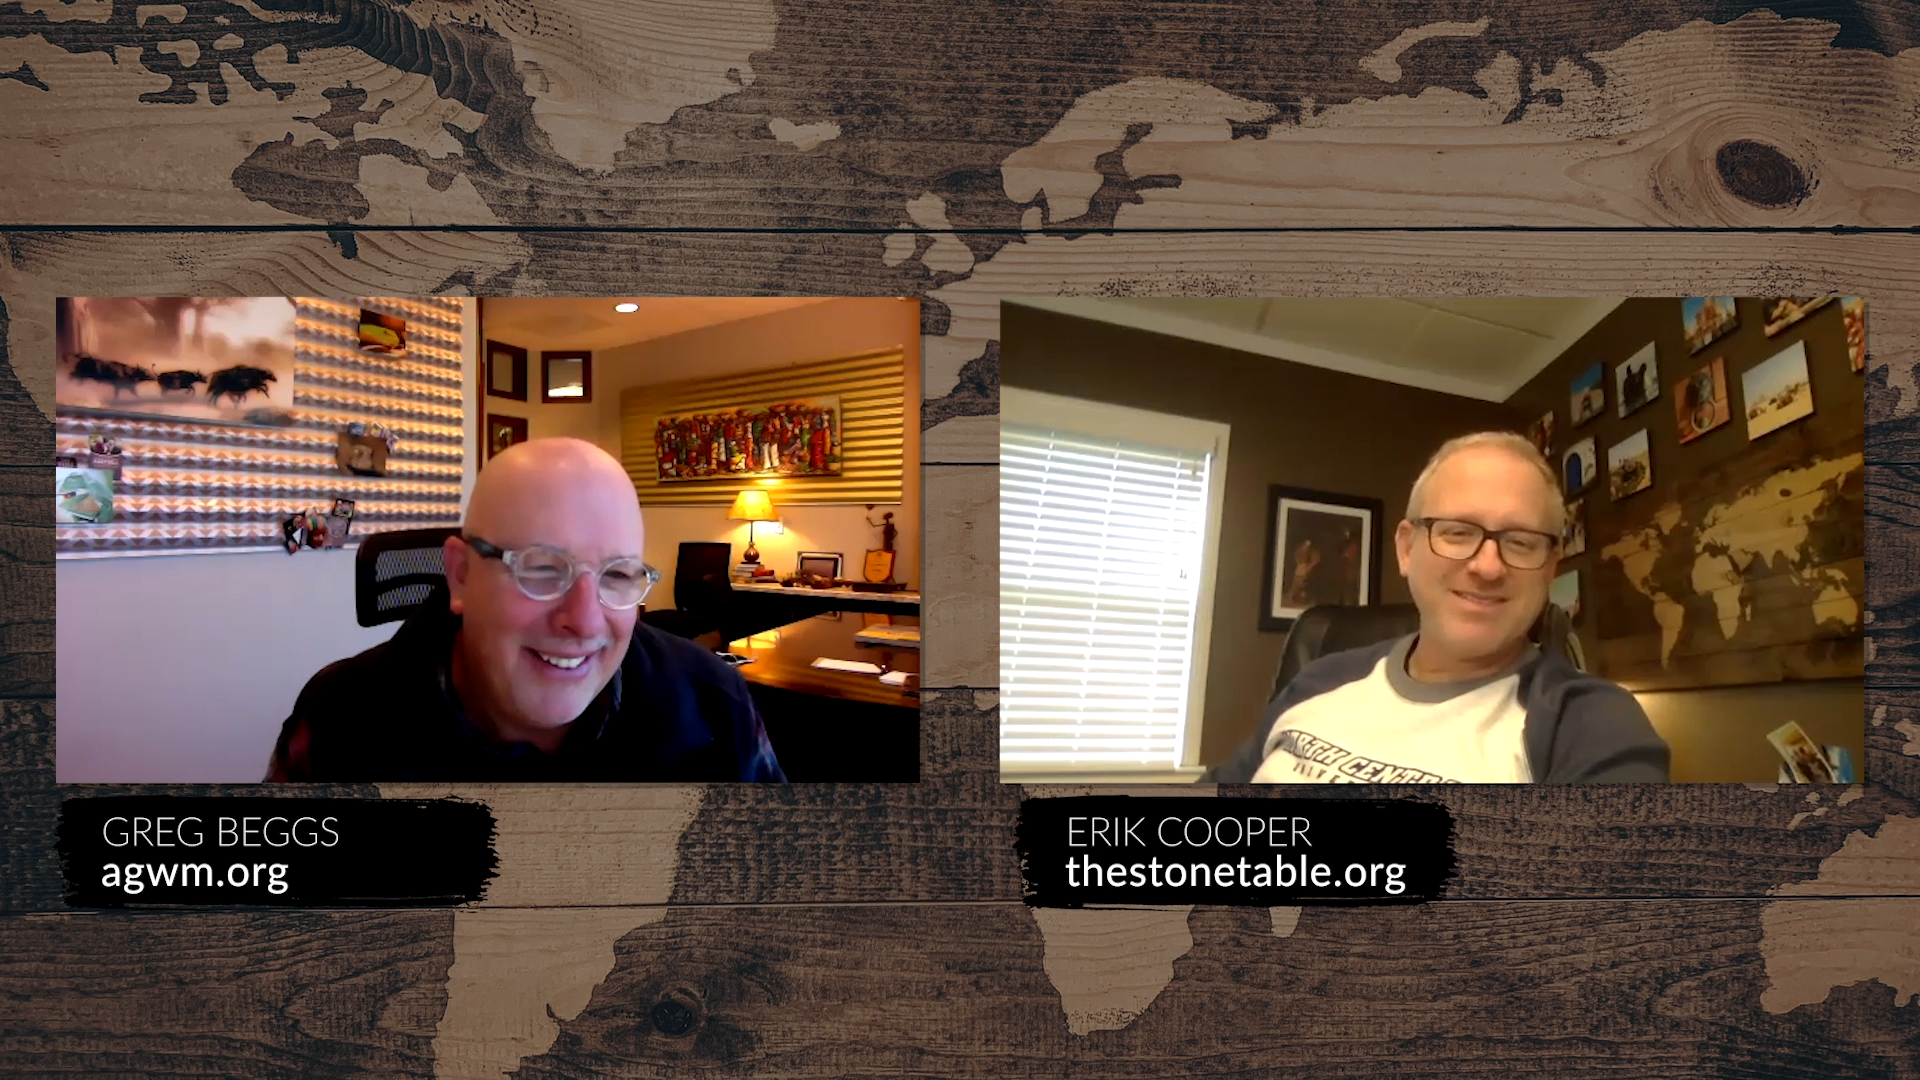 VIDEO: Interview with Greg Beggs, of Assemblies of God World Missions (AGWM)